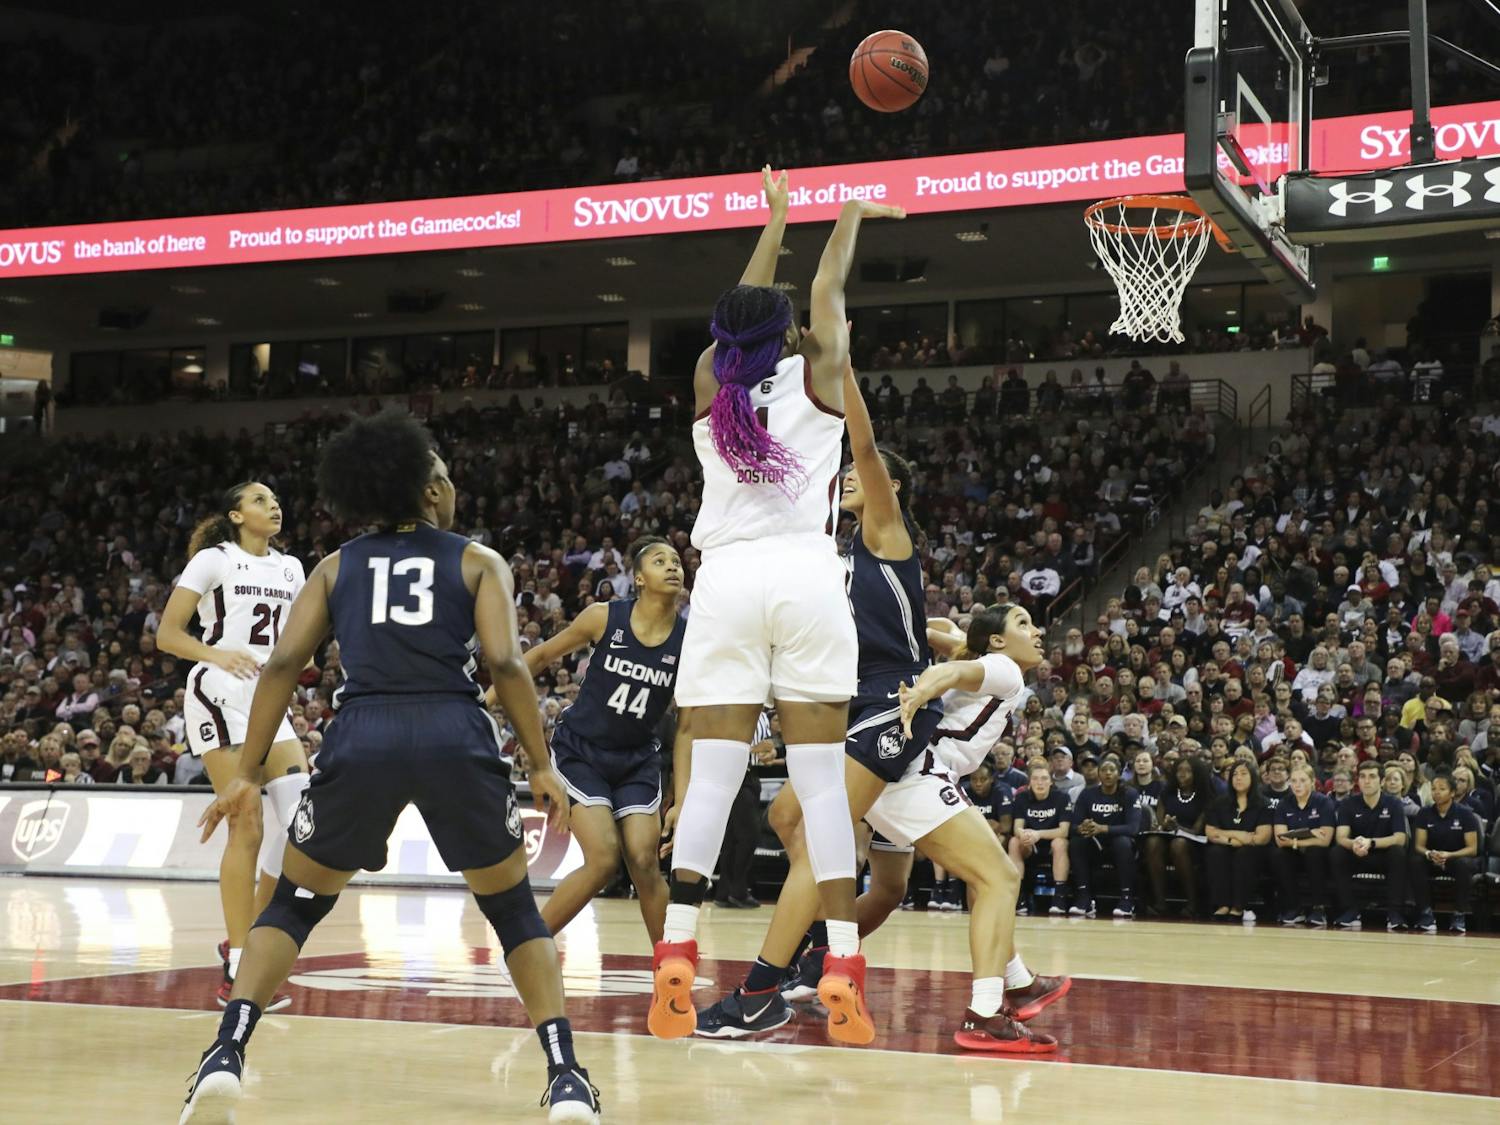 Freshman forward Aliyah Boston attempts to make a basket. Boston scored 13 points, 12 rebounds and one assist against UConn.